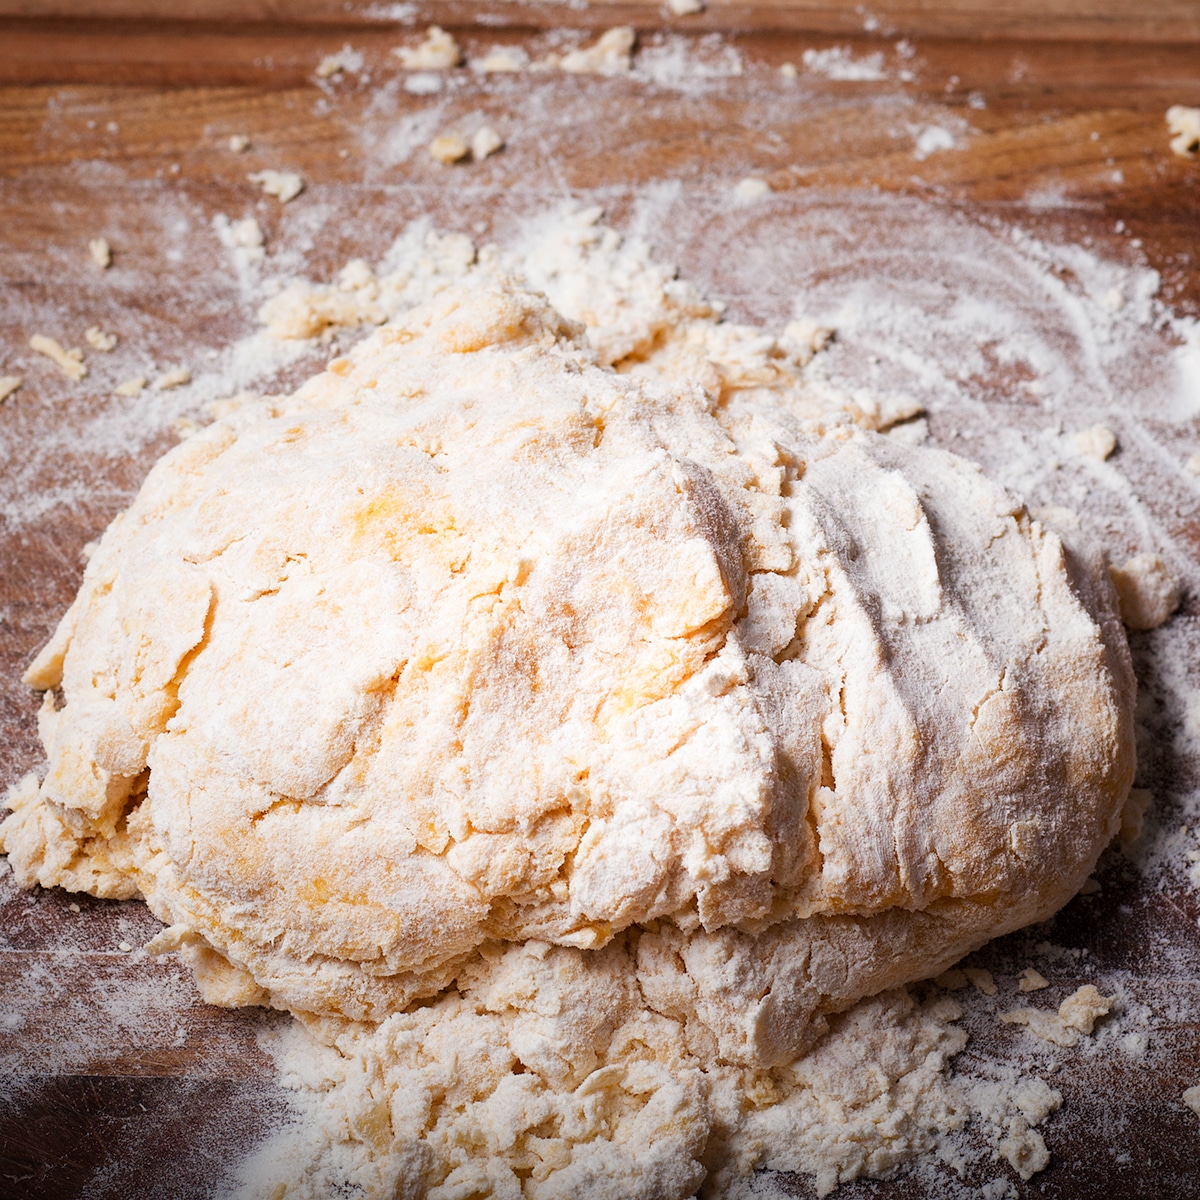 Incorporating more flour into the dough as you knead it.